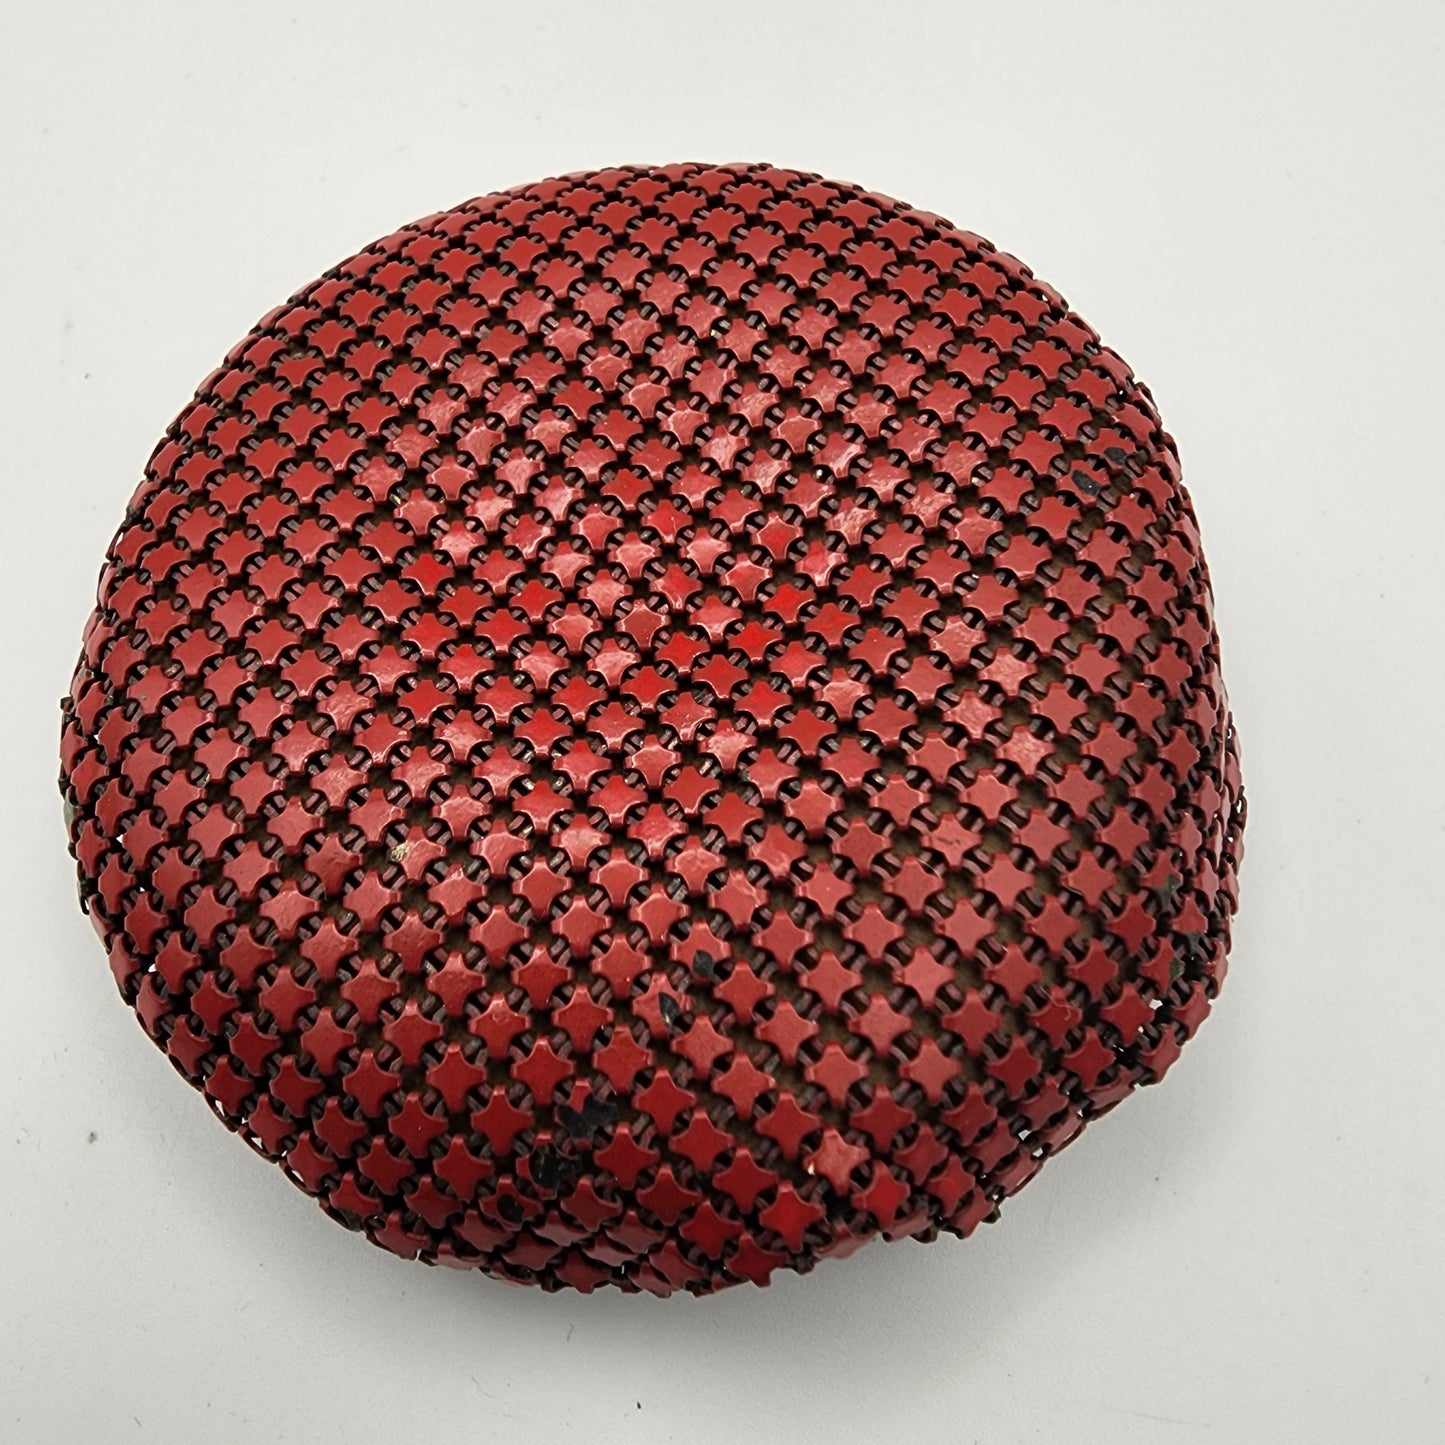 Vintage Red Mesh Bottom Compact